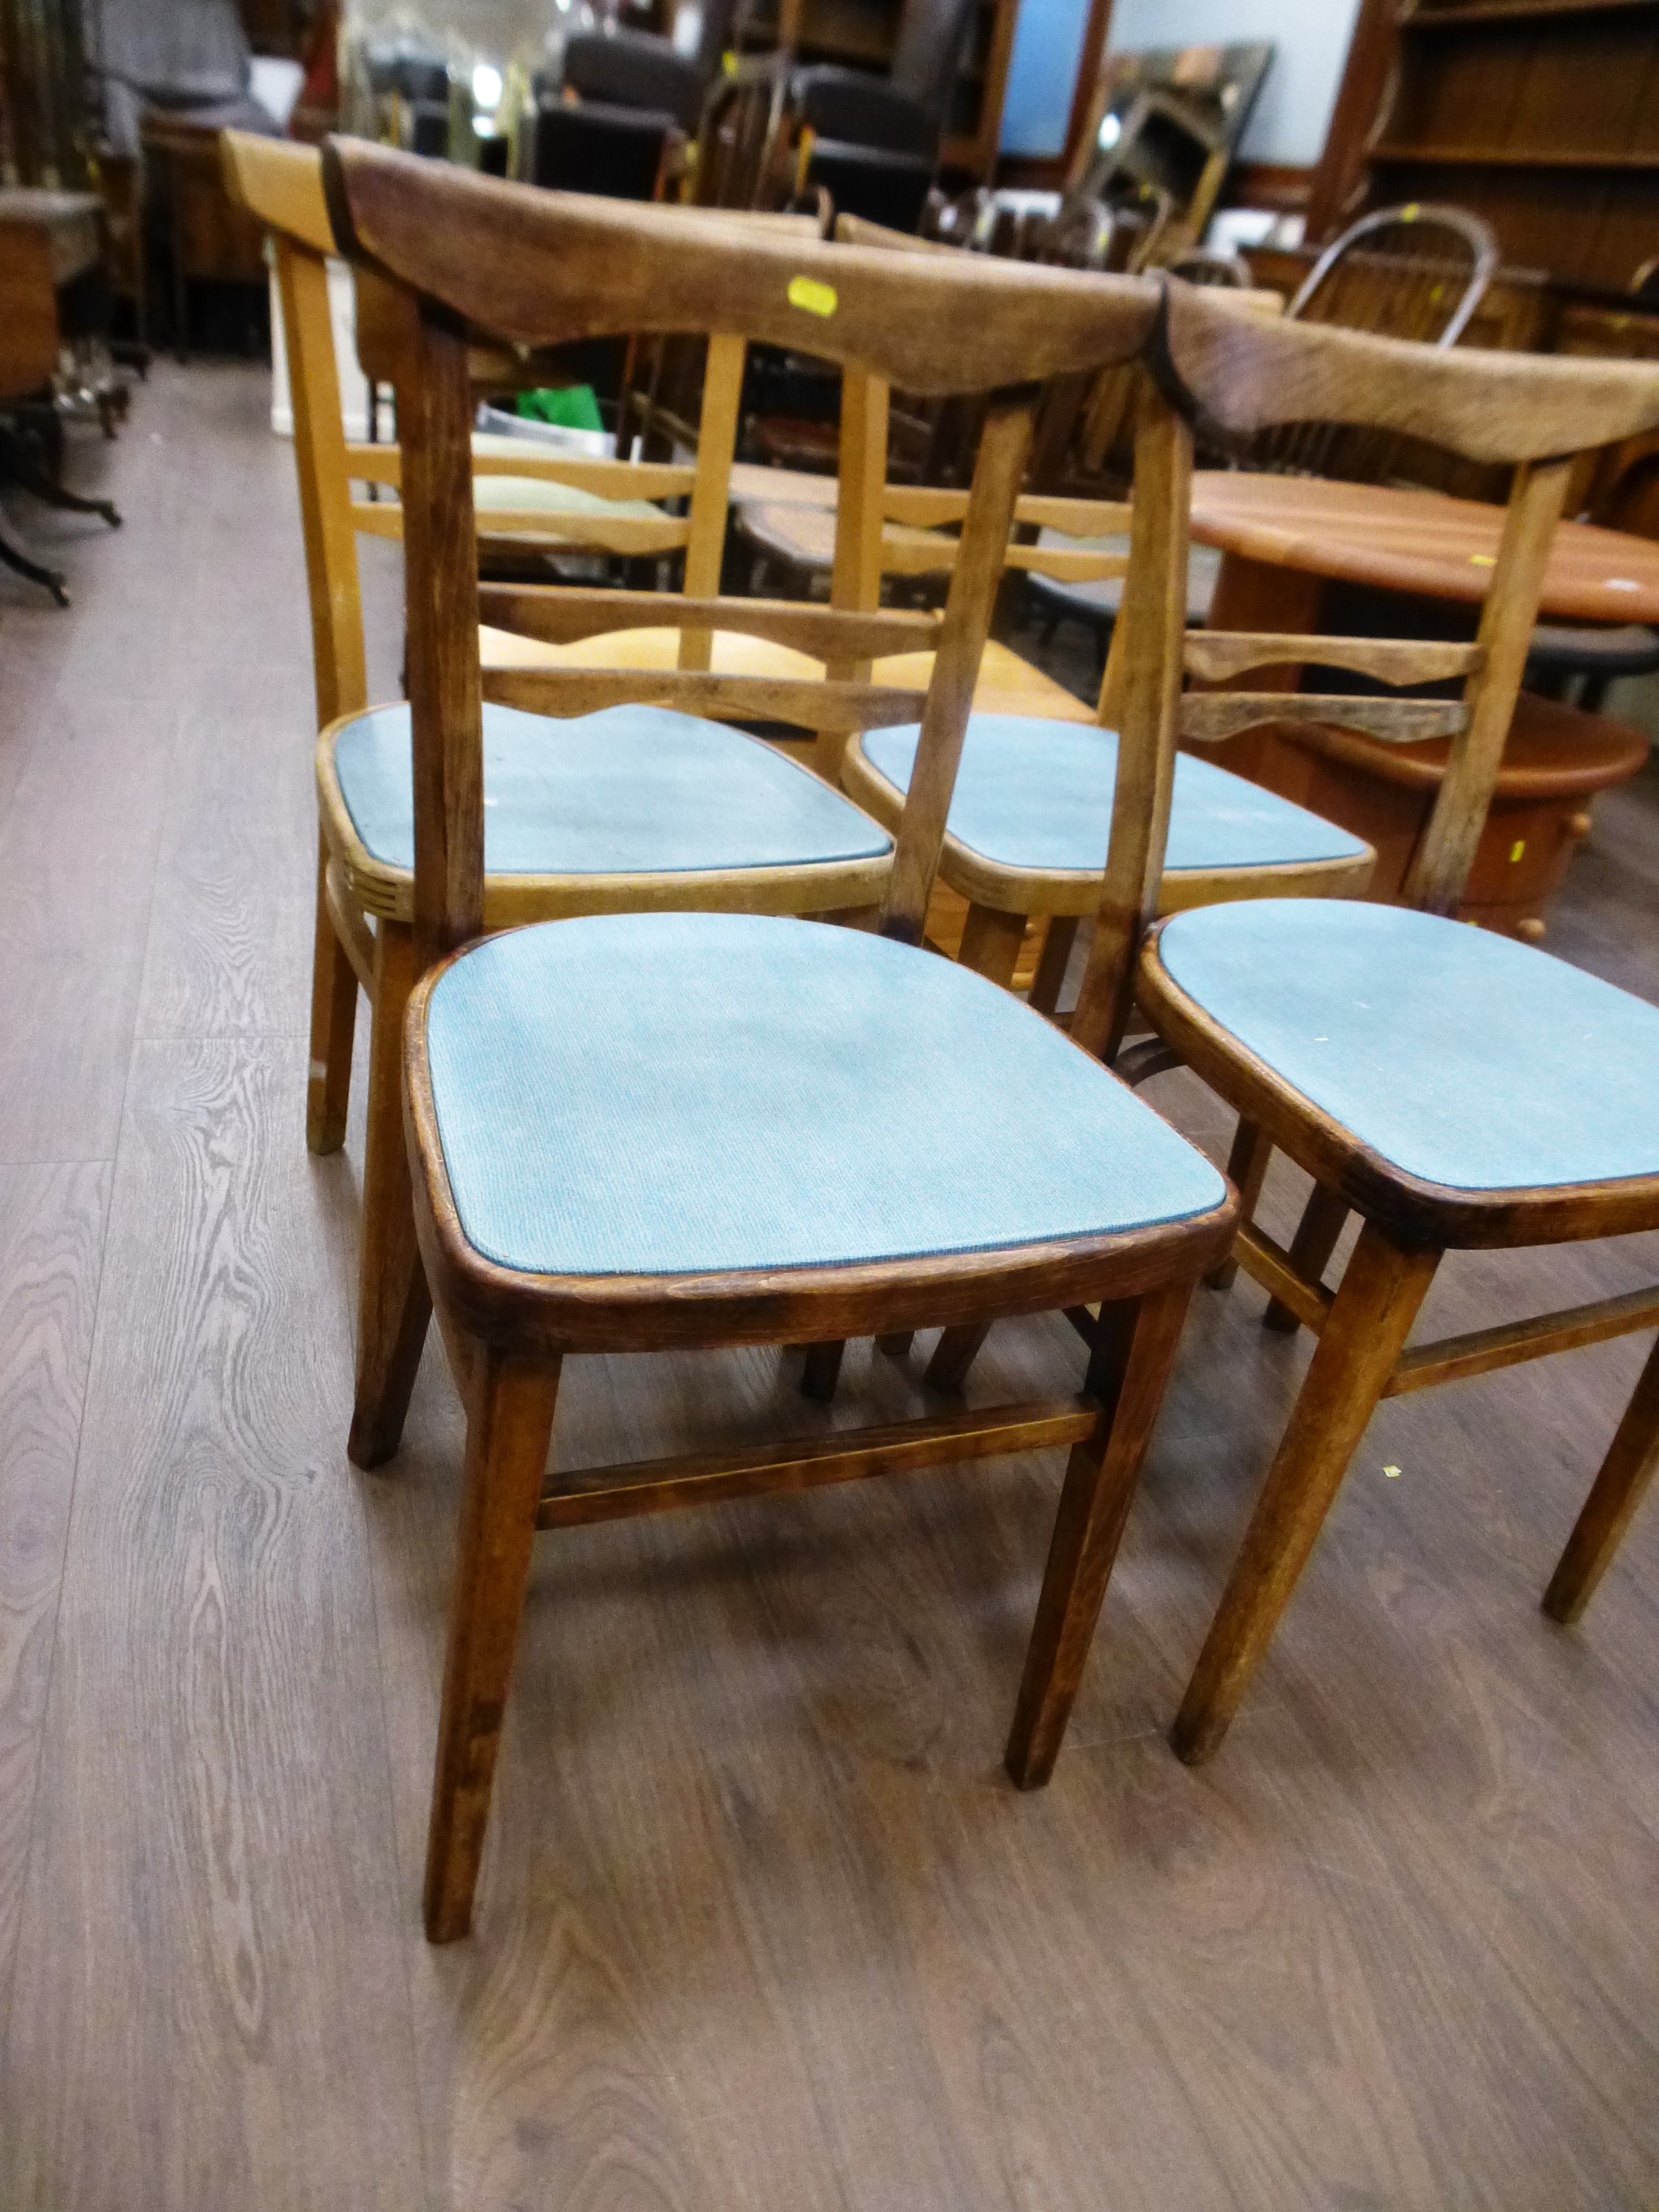 SET OF 4 PINE CHAIRS - Image 5 of 5